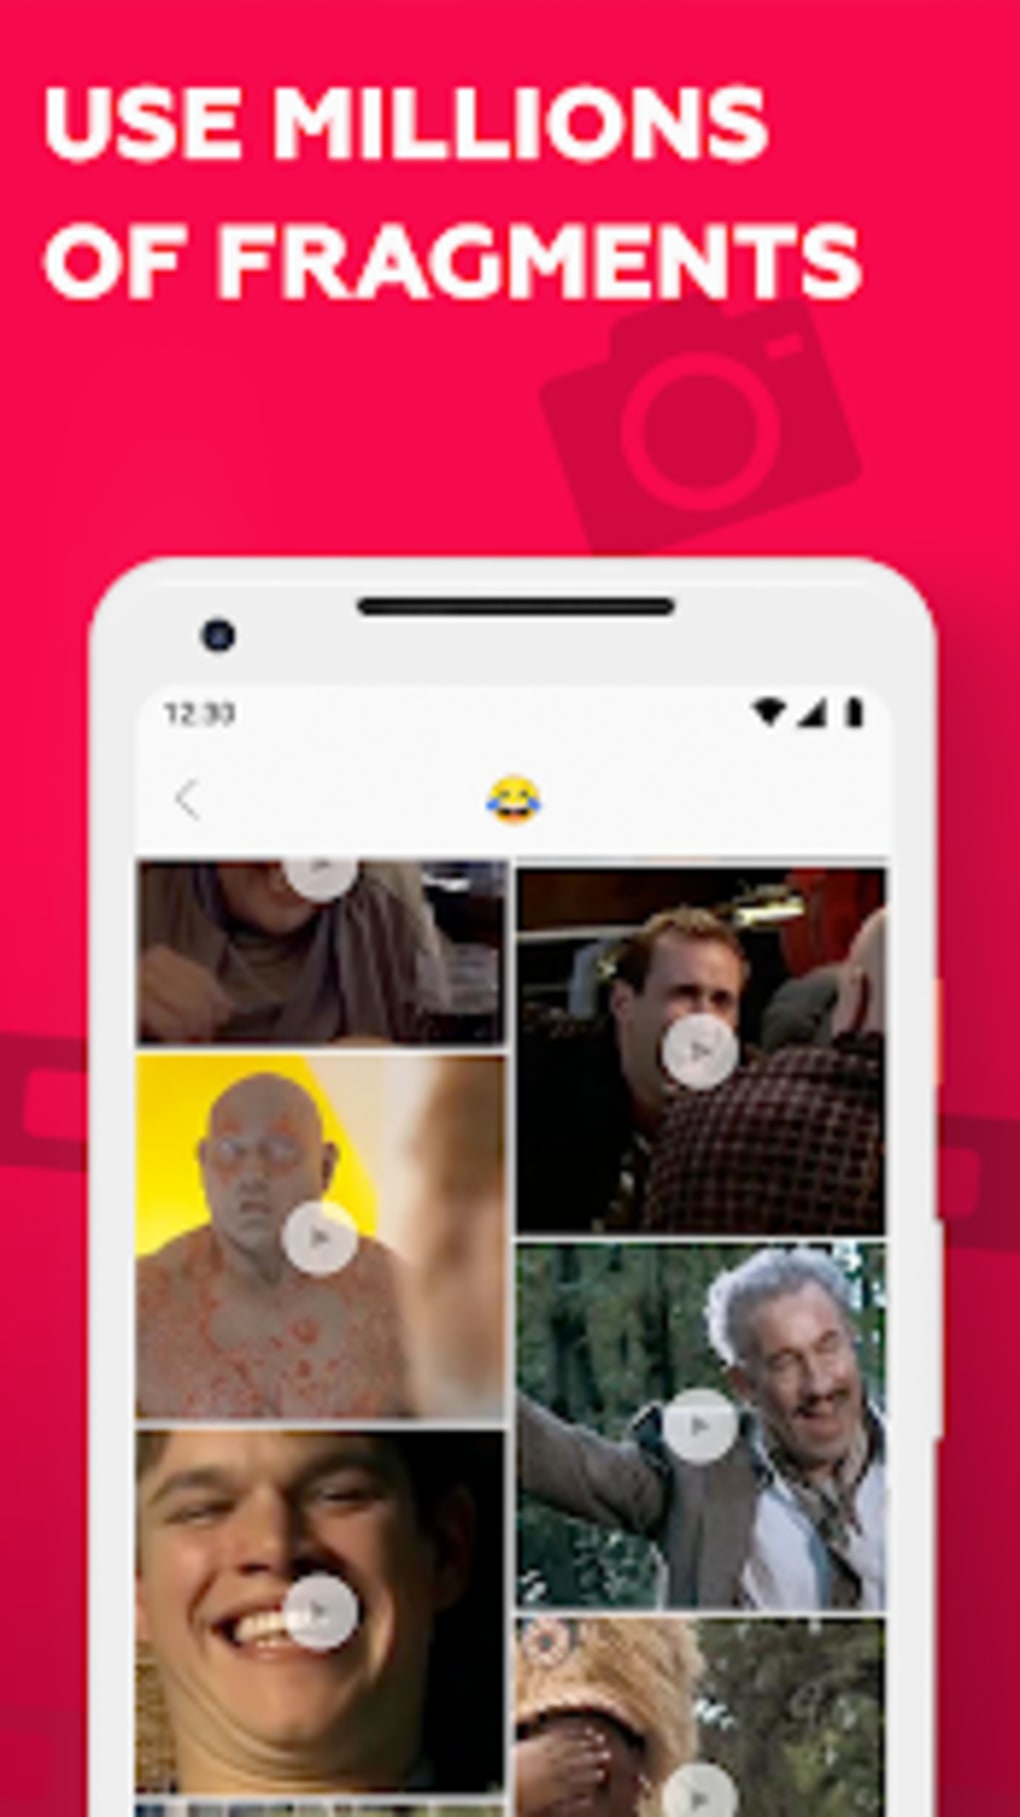 Video Meme Maker & Text to Vid APK for Android Download